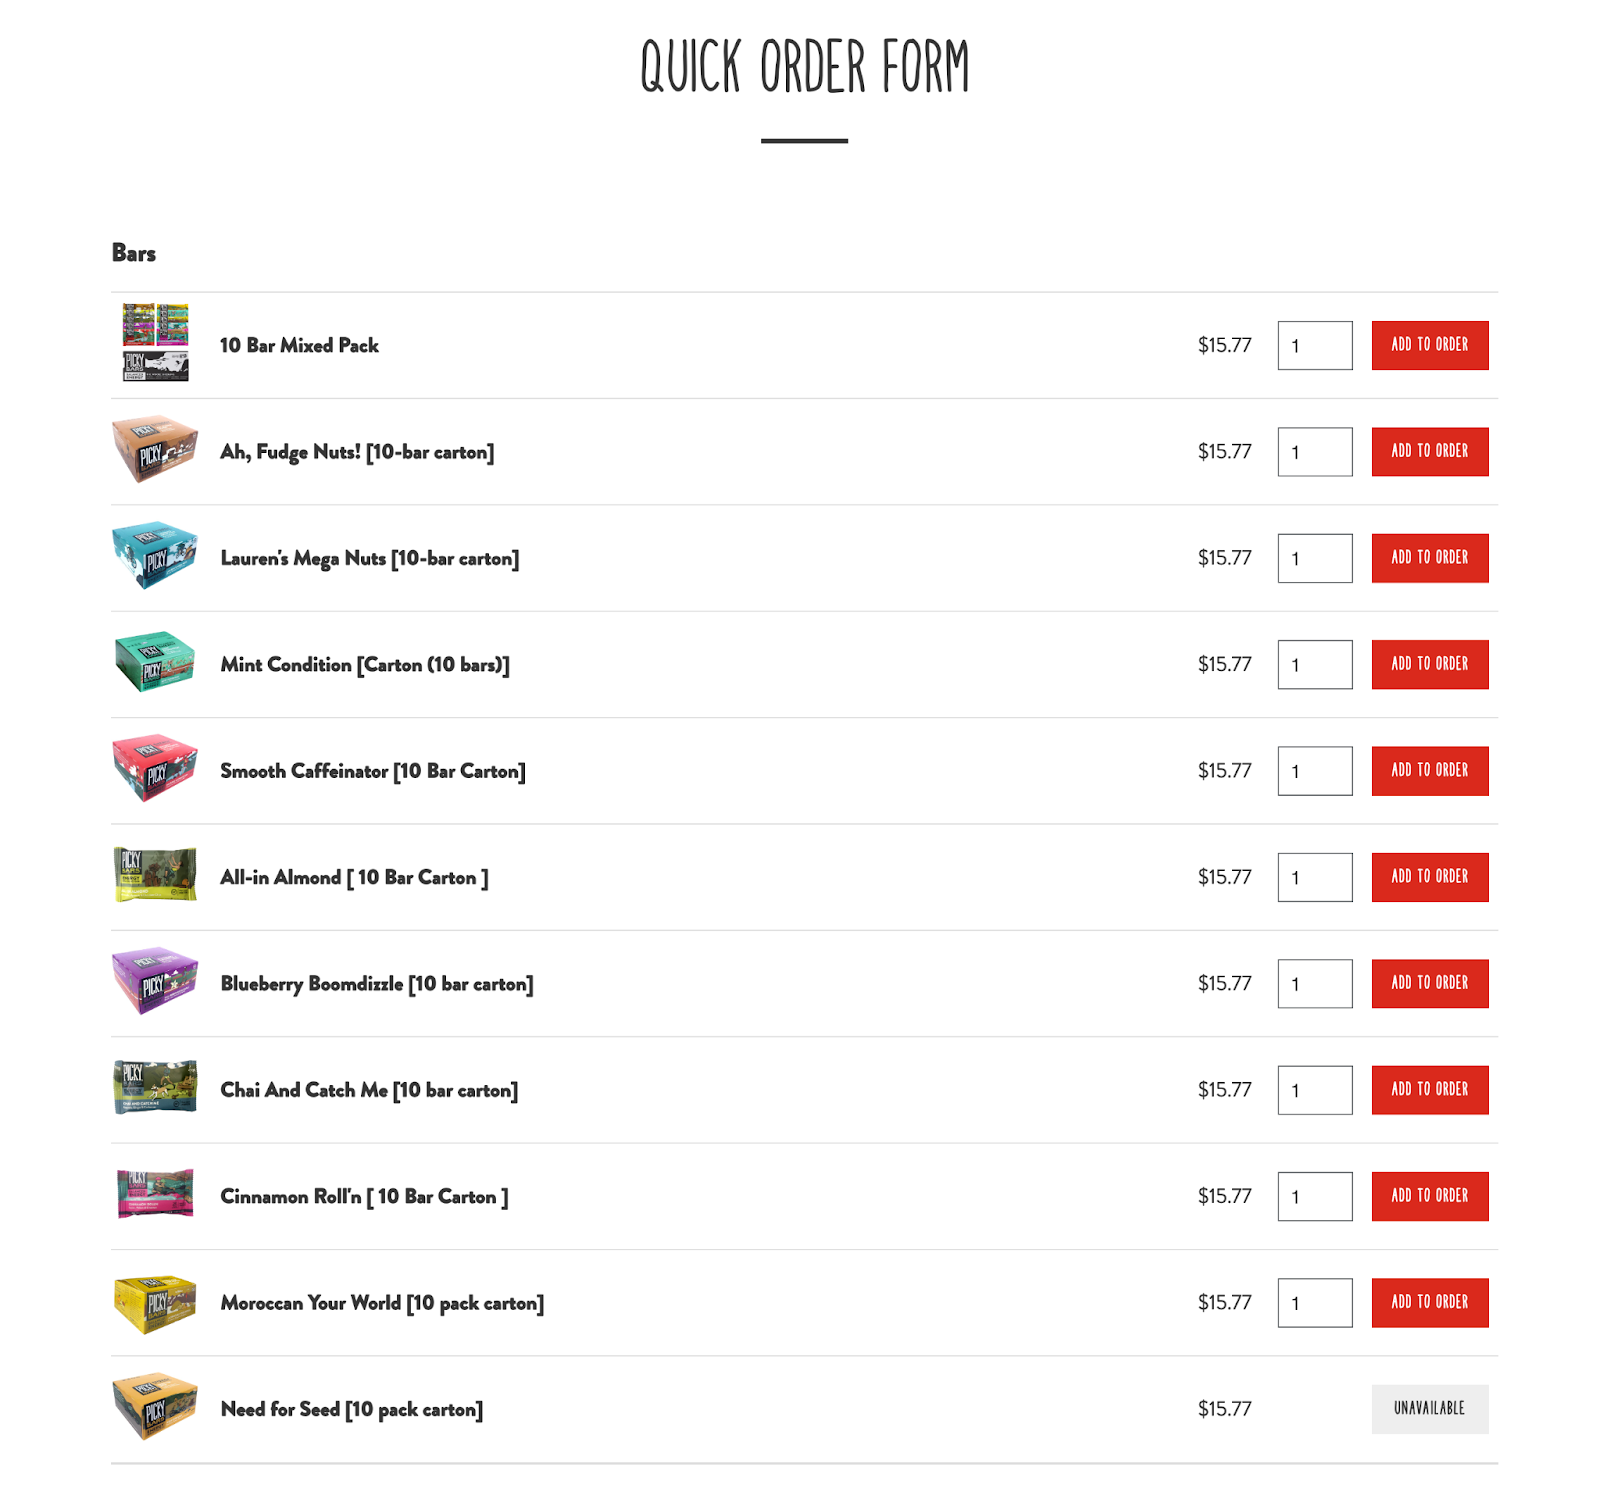 A list of products, each with a red “Add to order” button on the right for easy ordering